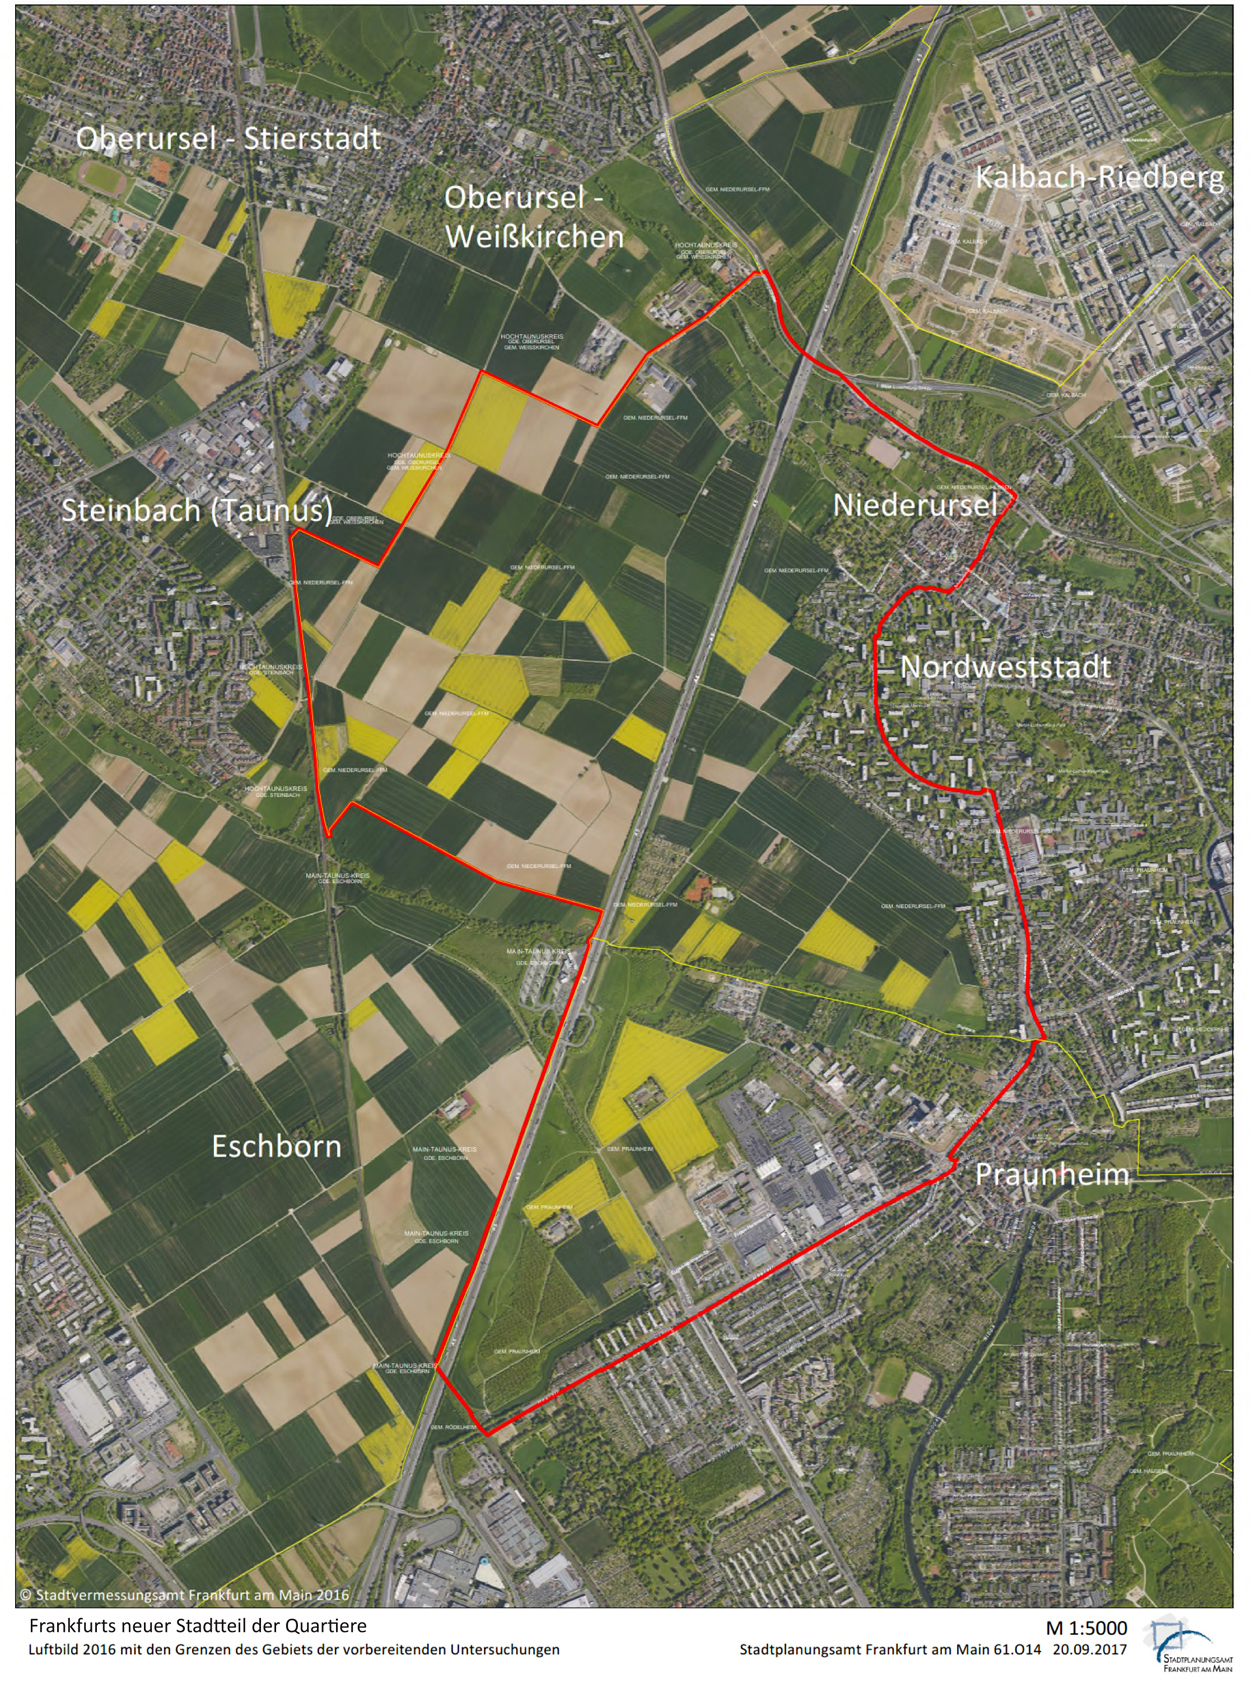 Aerial photo 2016 with the borders of the area covered by the preparatory investigation, © City of Frankfurt Planning Dept.; aerial photo: City of Frankfurt Survey Dept.